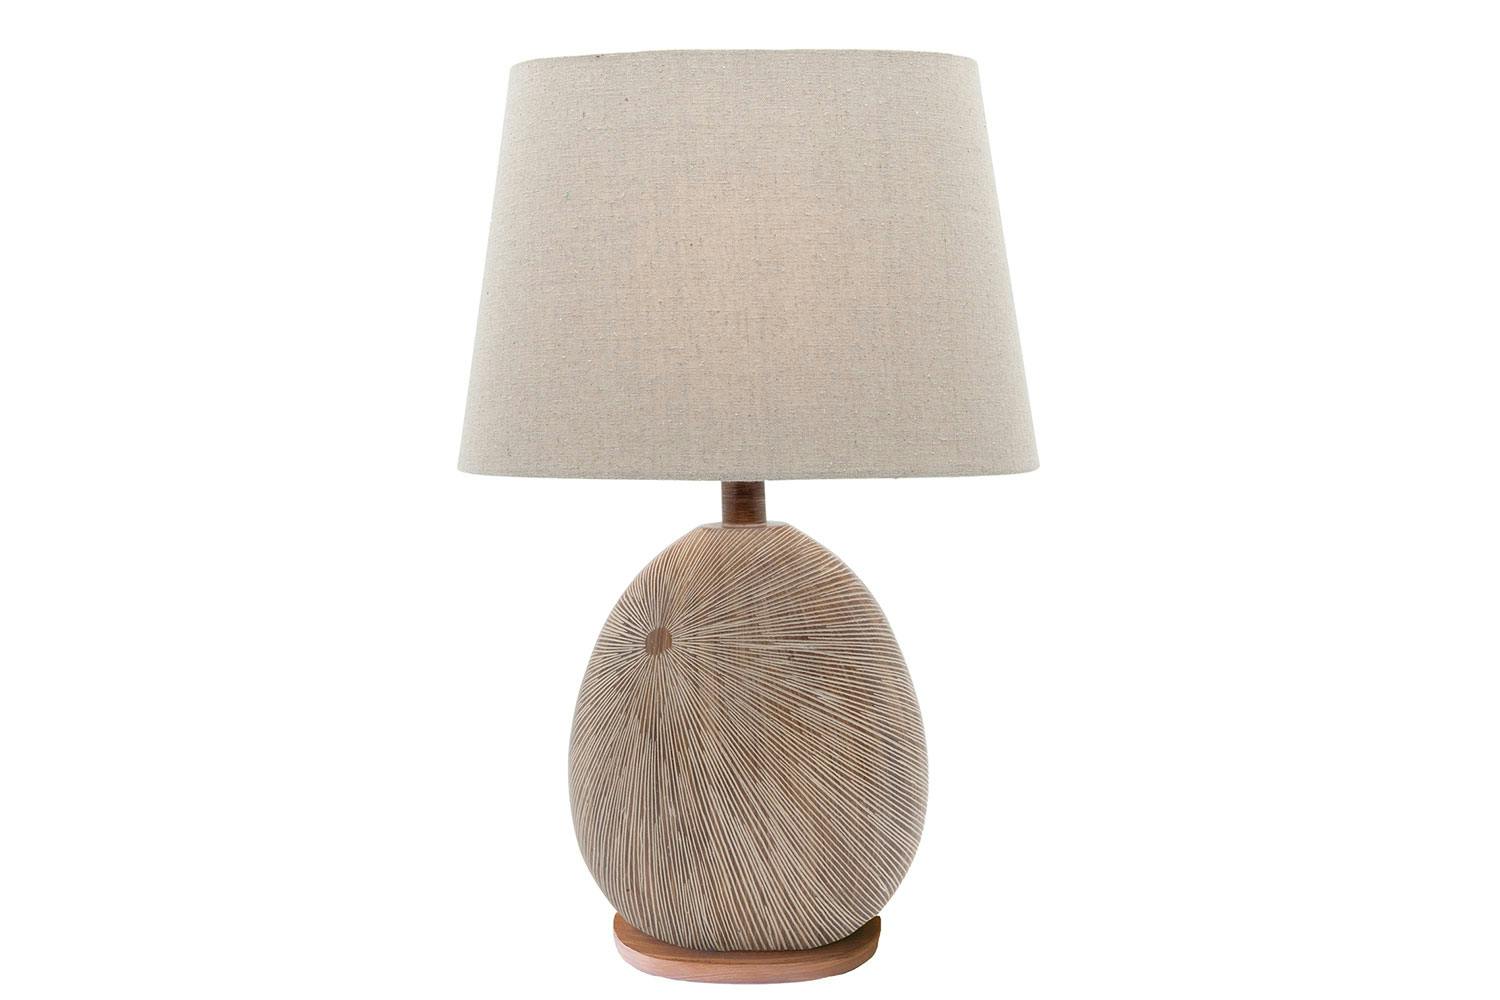 Delu Timber Table Lamp by Shady Lady   Harvey Norman New Zealand